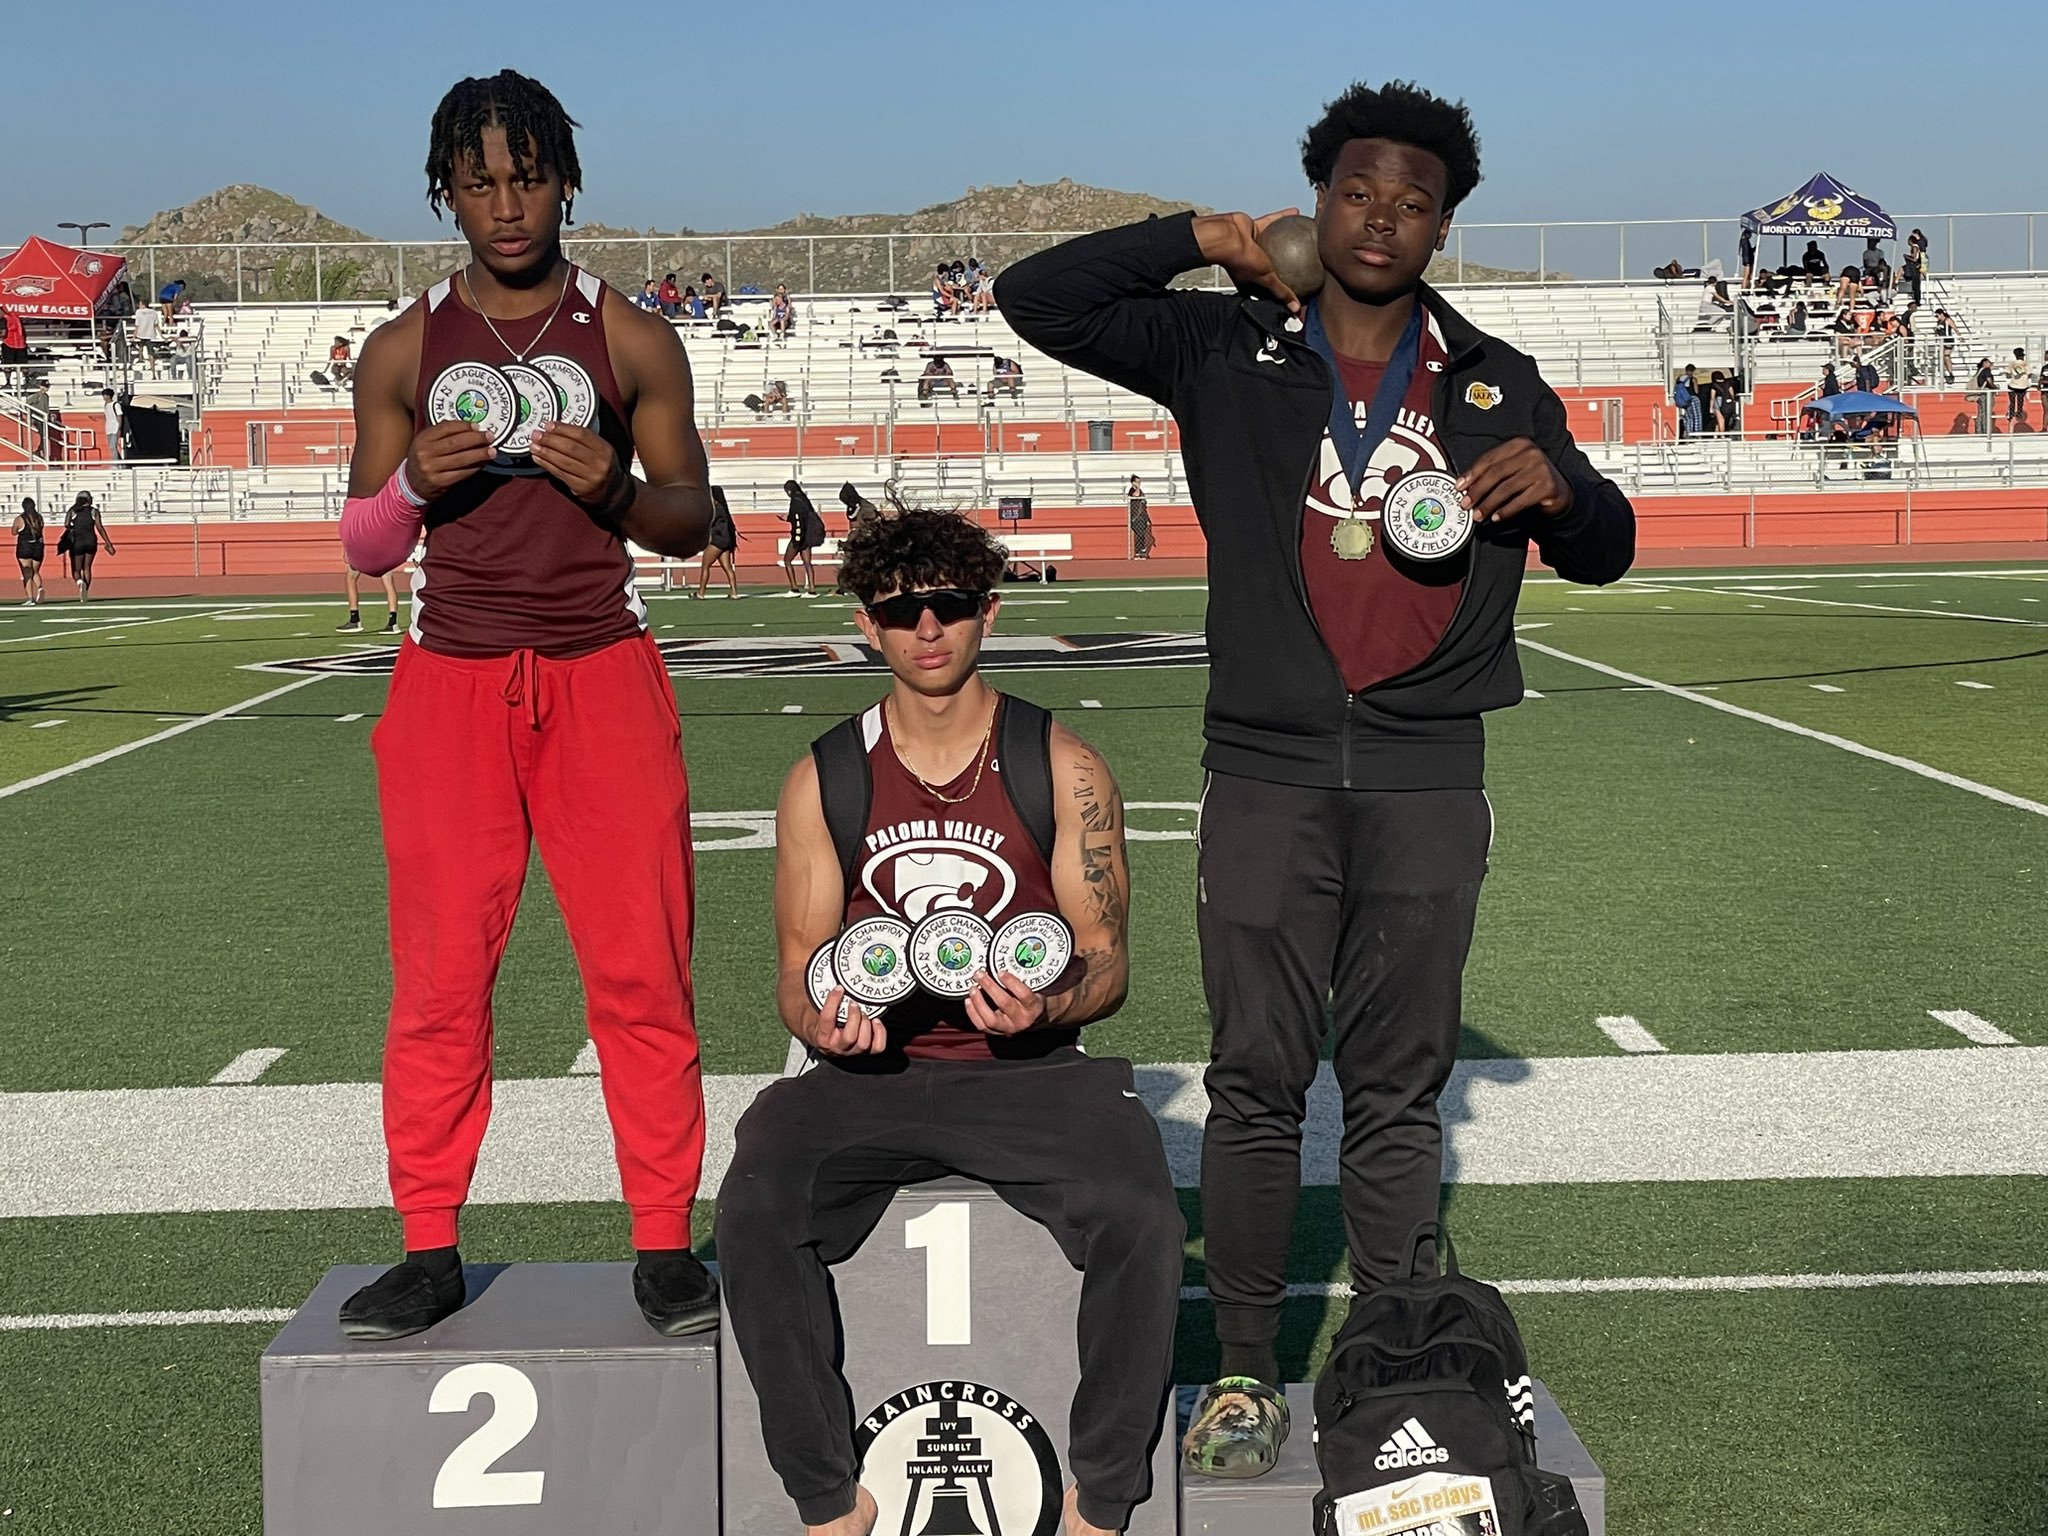 Record number of Paloma athletes qualify for track prelims Menifee 24/7